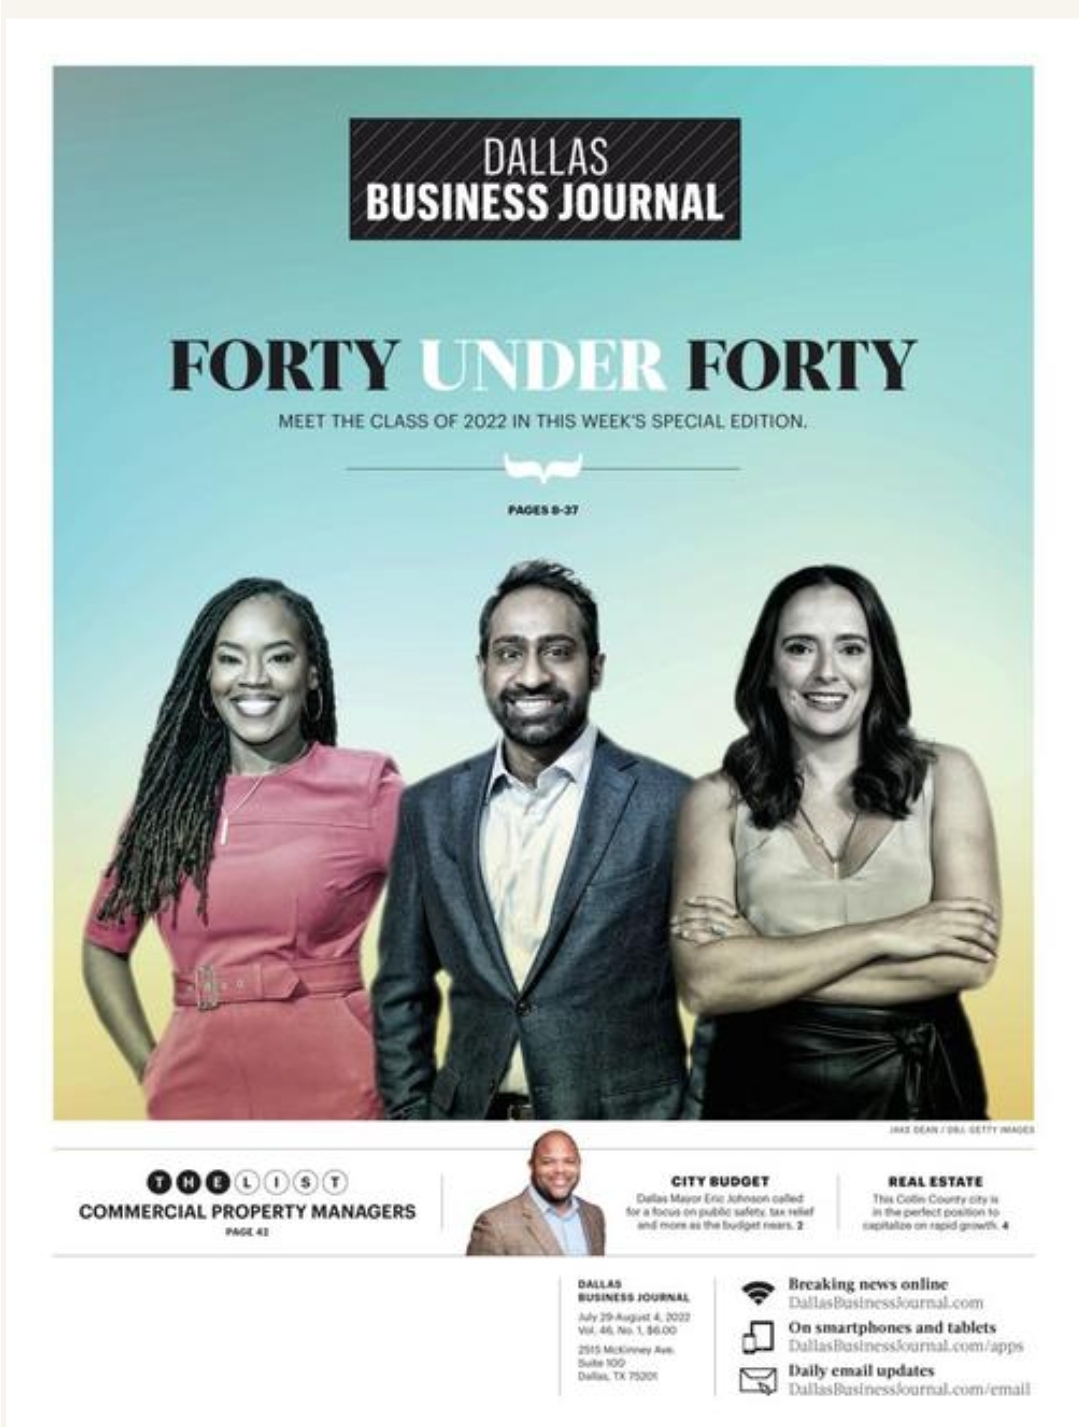 Flyer for the Dallas Business Journal's Forty Under Forty. The picture shows three business people, including Kay Brown-Patrick.